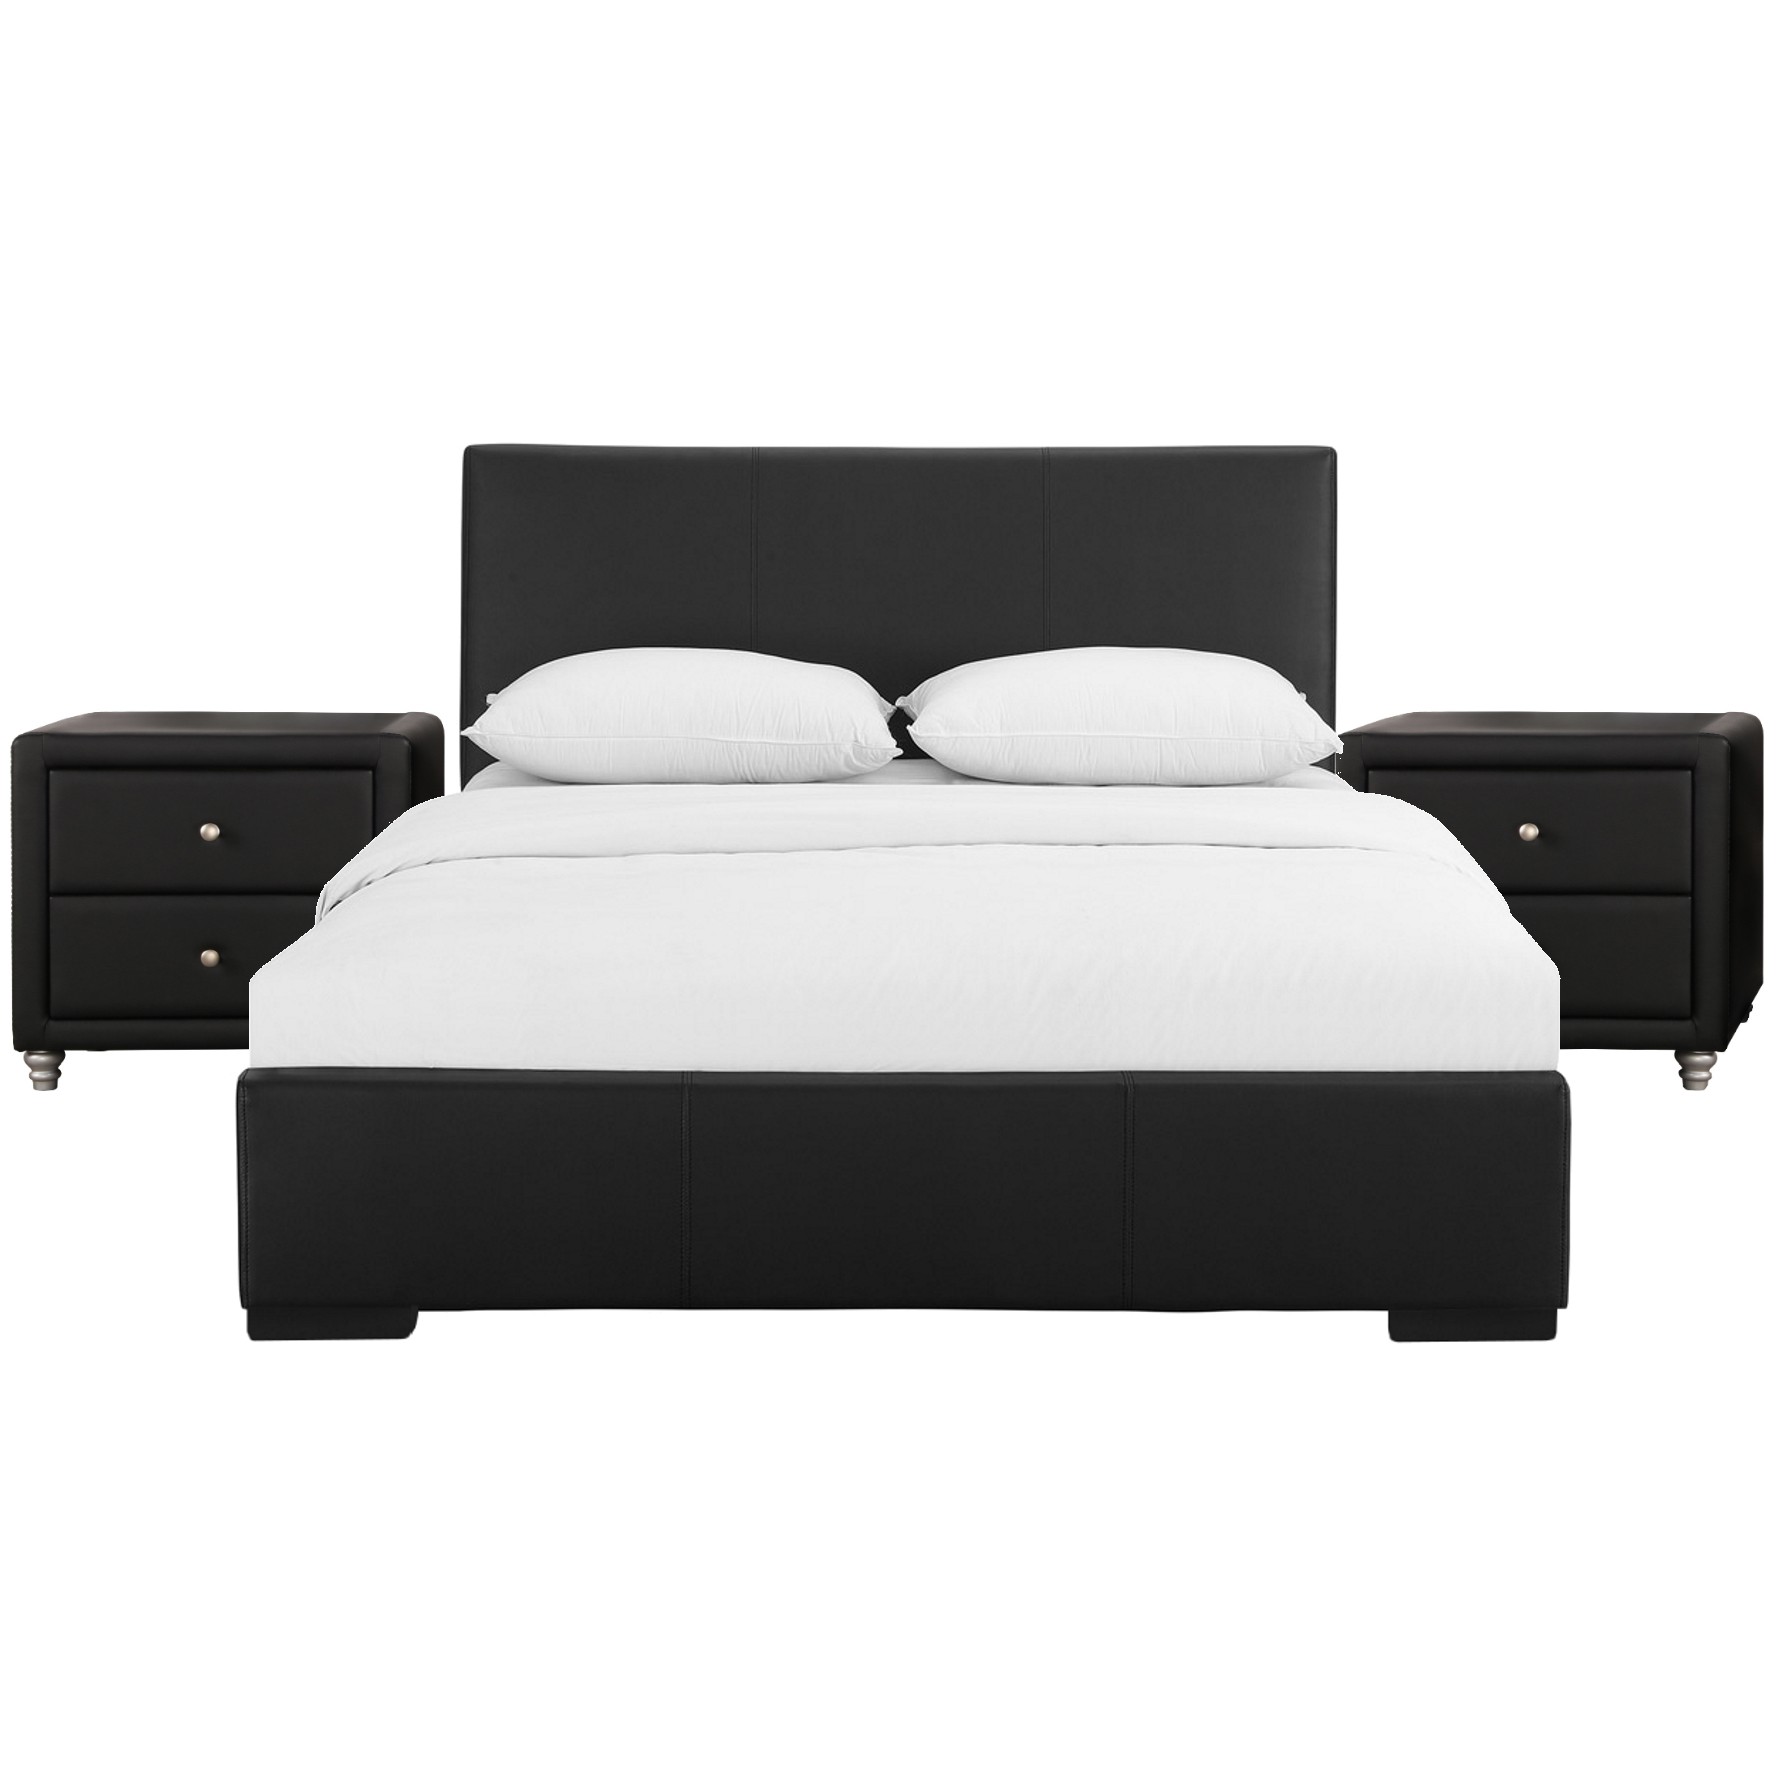 Solid Manufactured Wood Black Standard Bed Upholstered With Headboard-397051-1